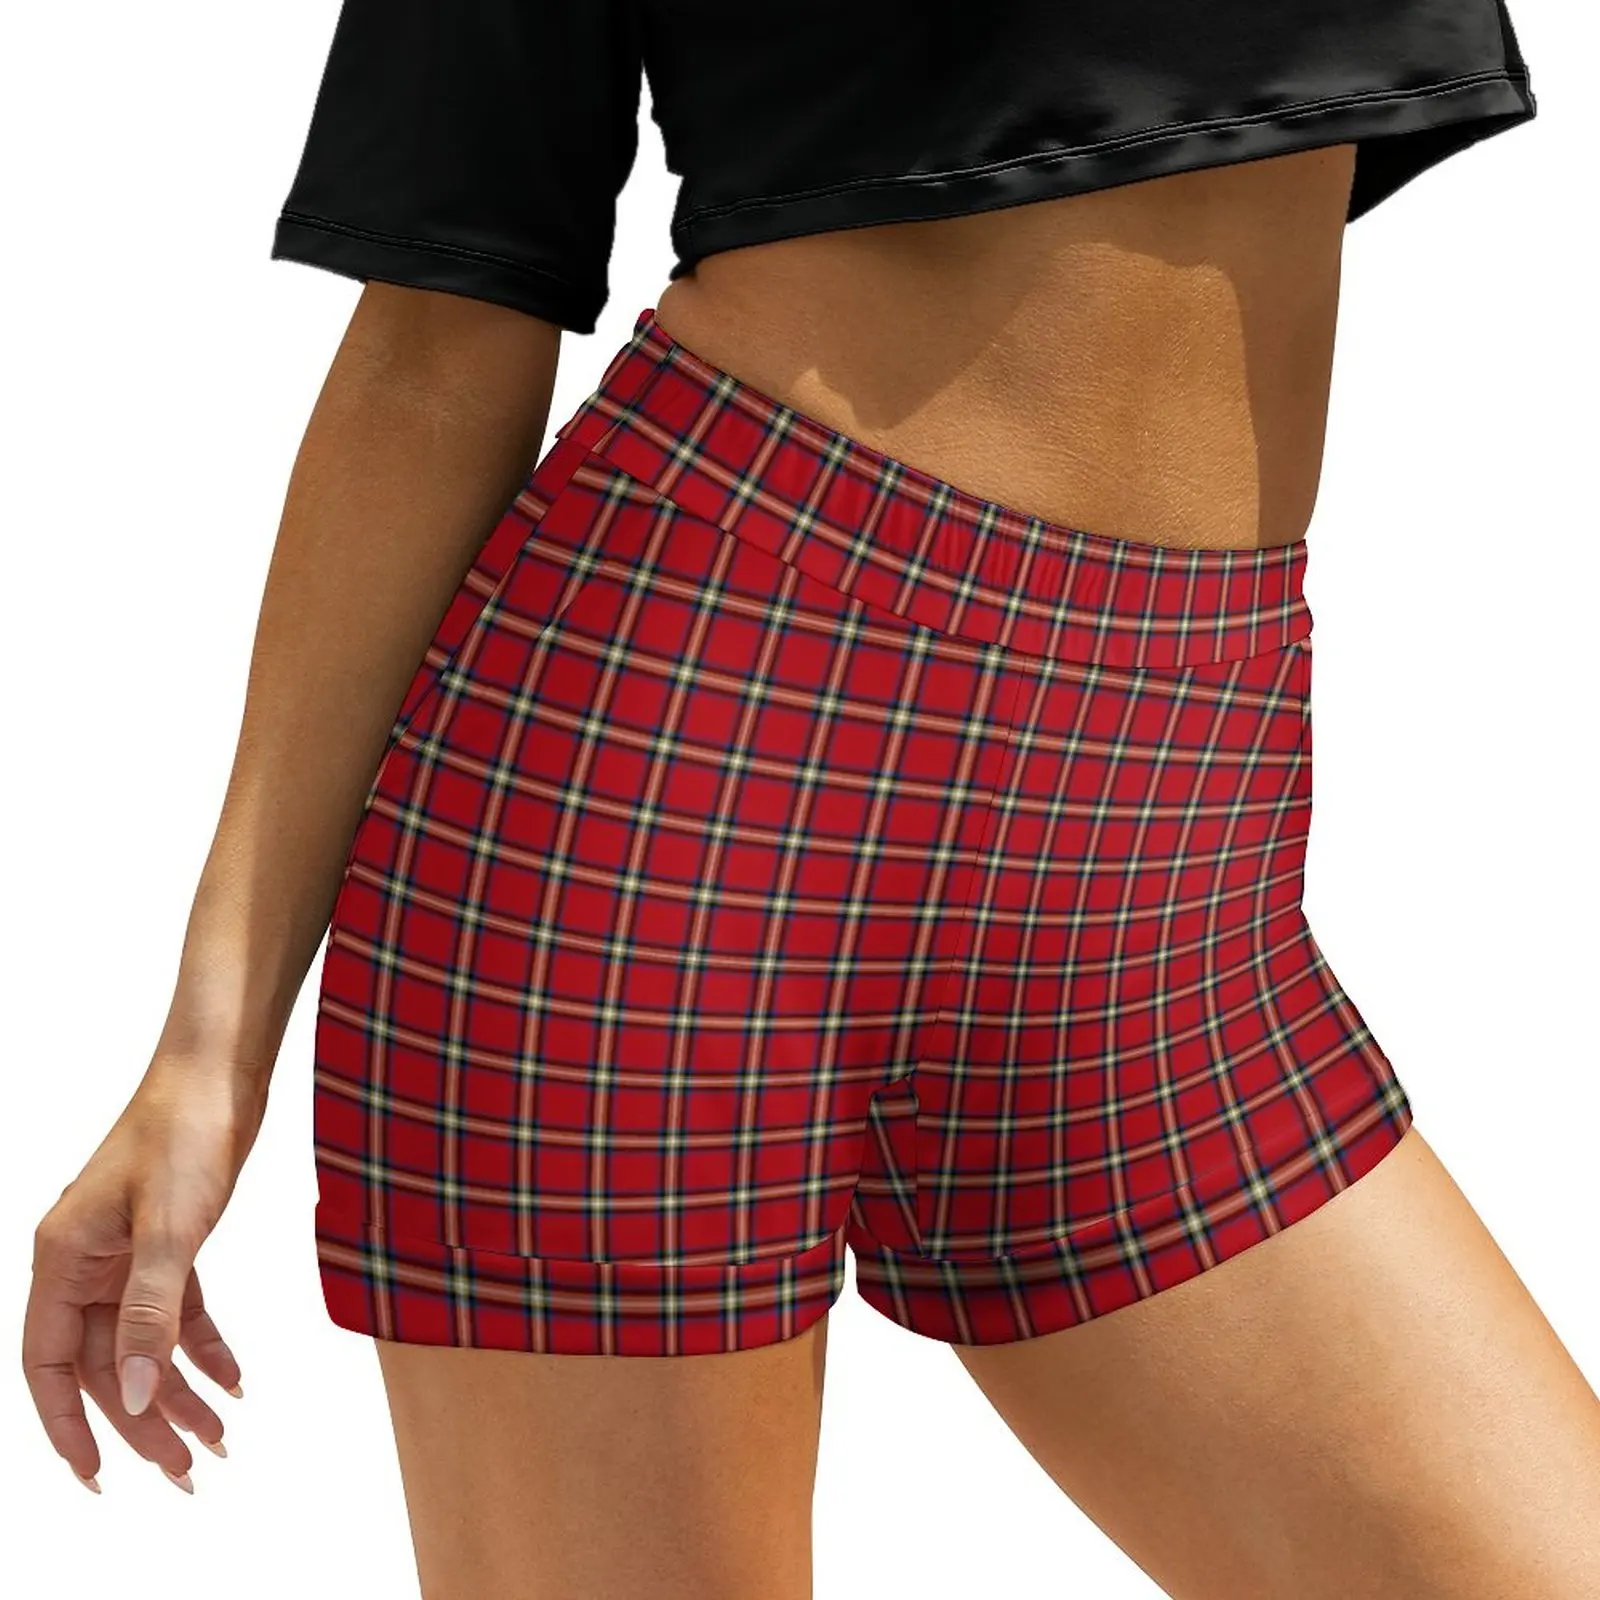 Red Plaid Shorts High Waisted Elegant Shorts Casual Oversized Short Pants Summer Graphic Bottoms